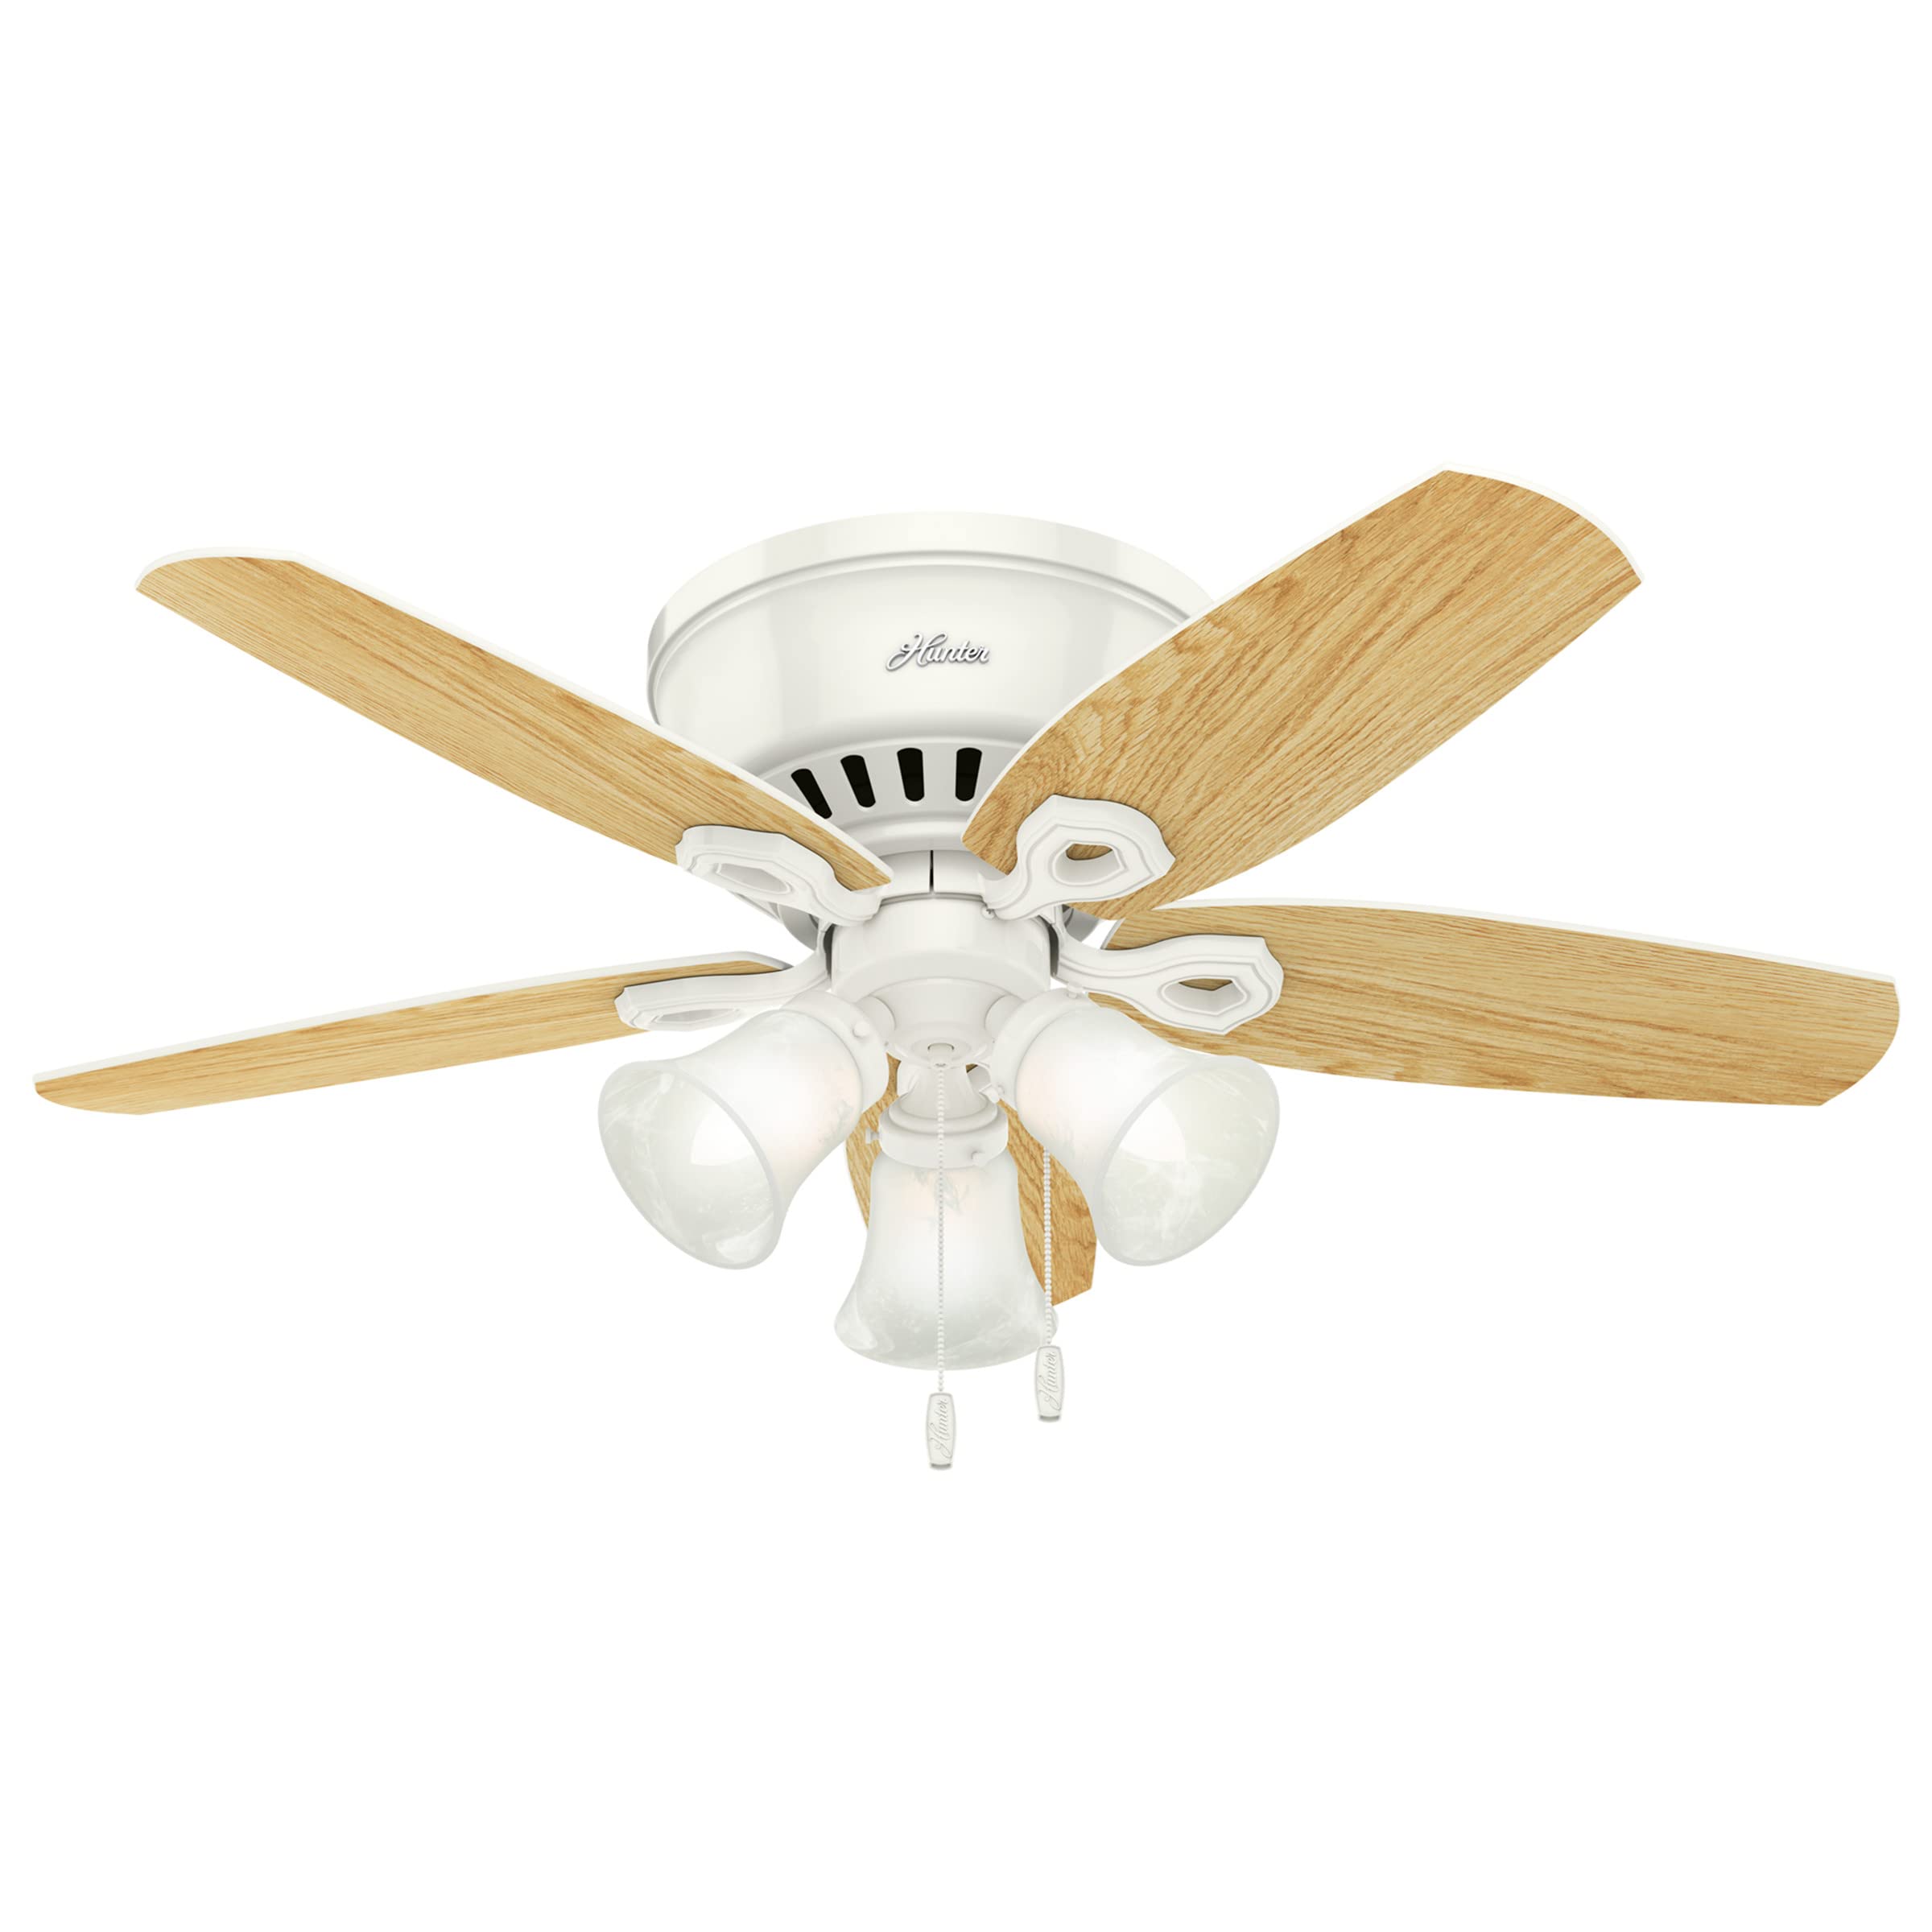 Hunter Fan Company, 51090, 42 inch Builder Snow White Low Profile Ceiling Fan with LED Light Kit and Pull Chain